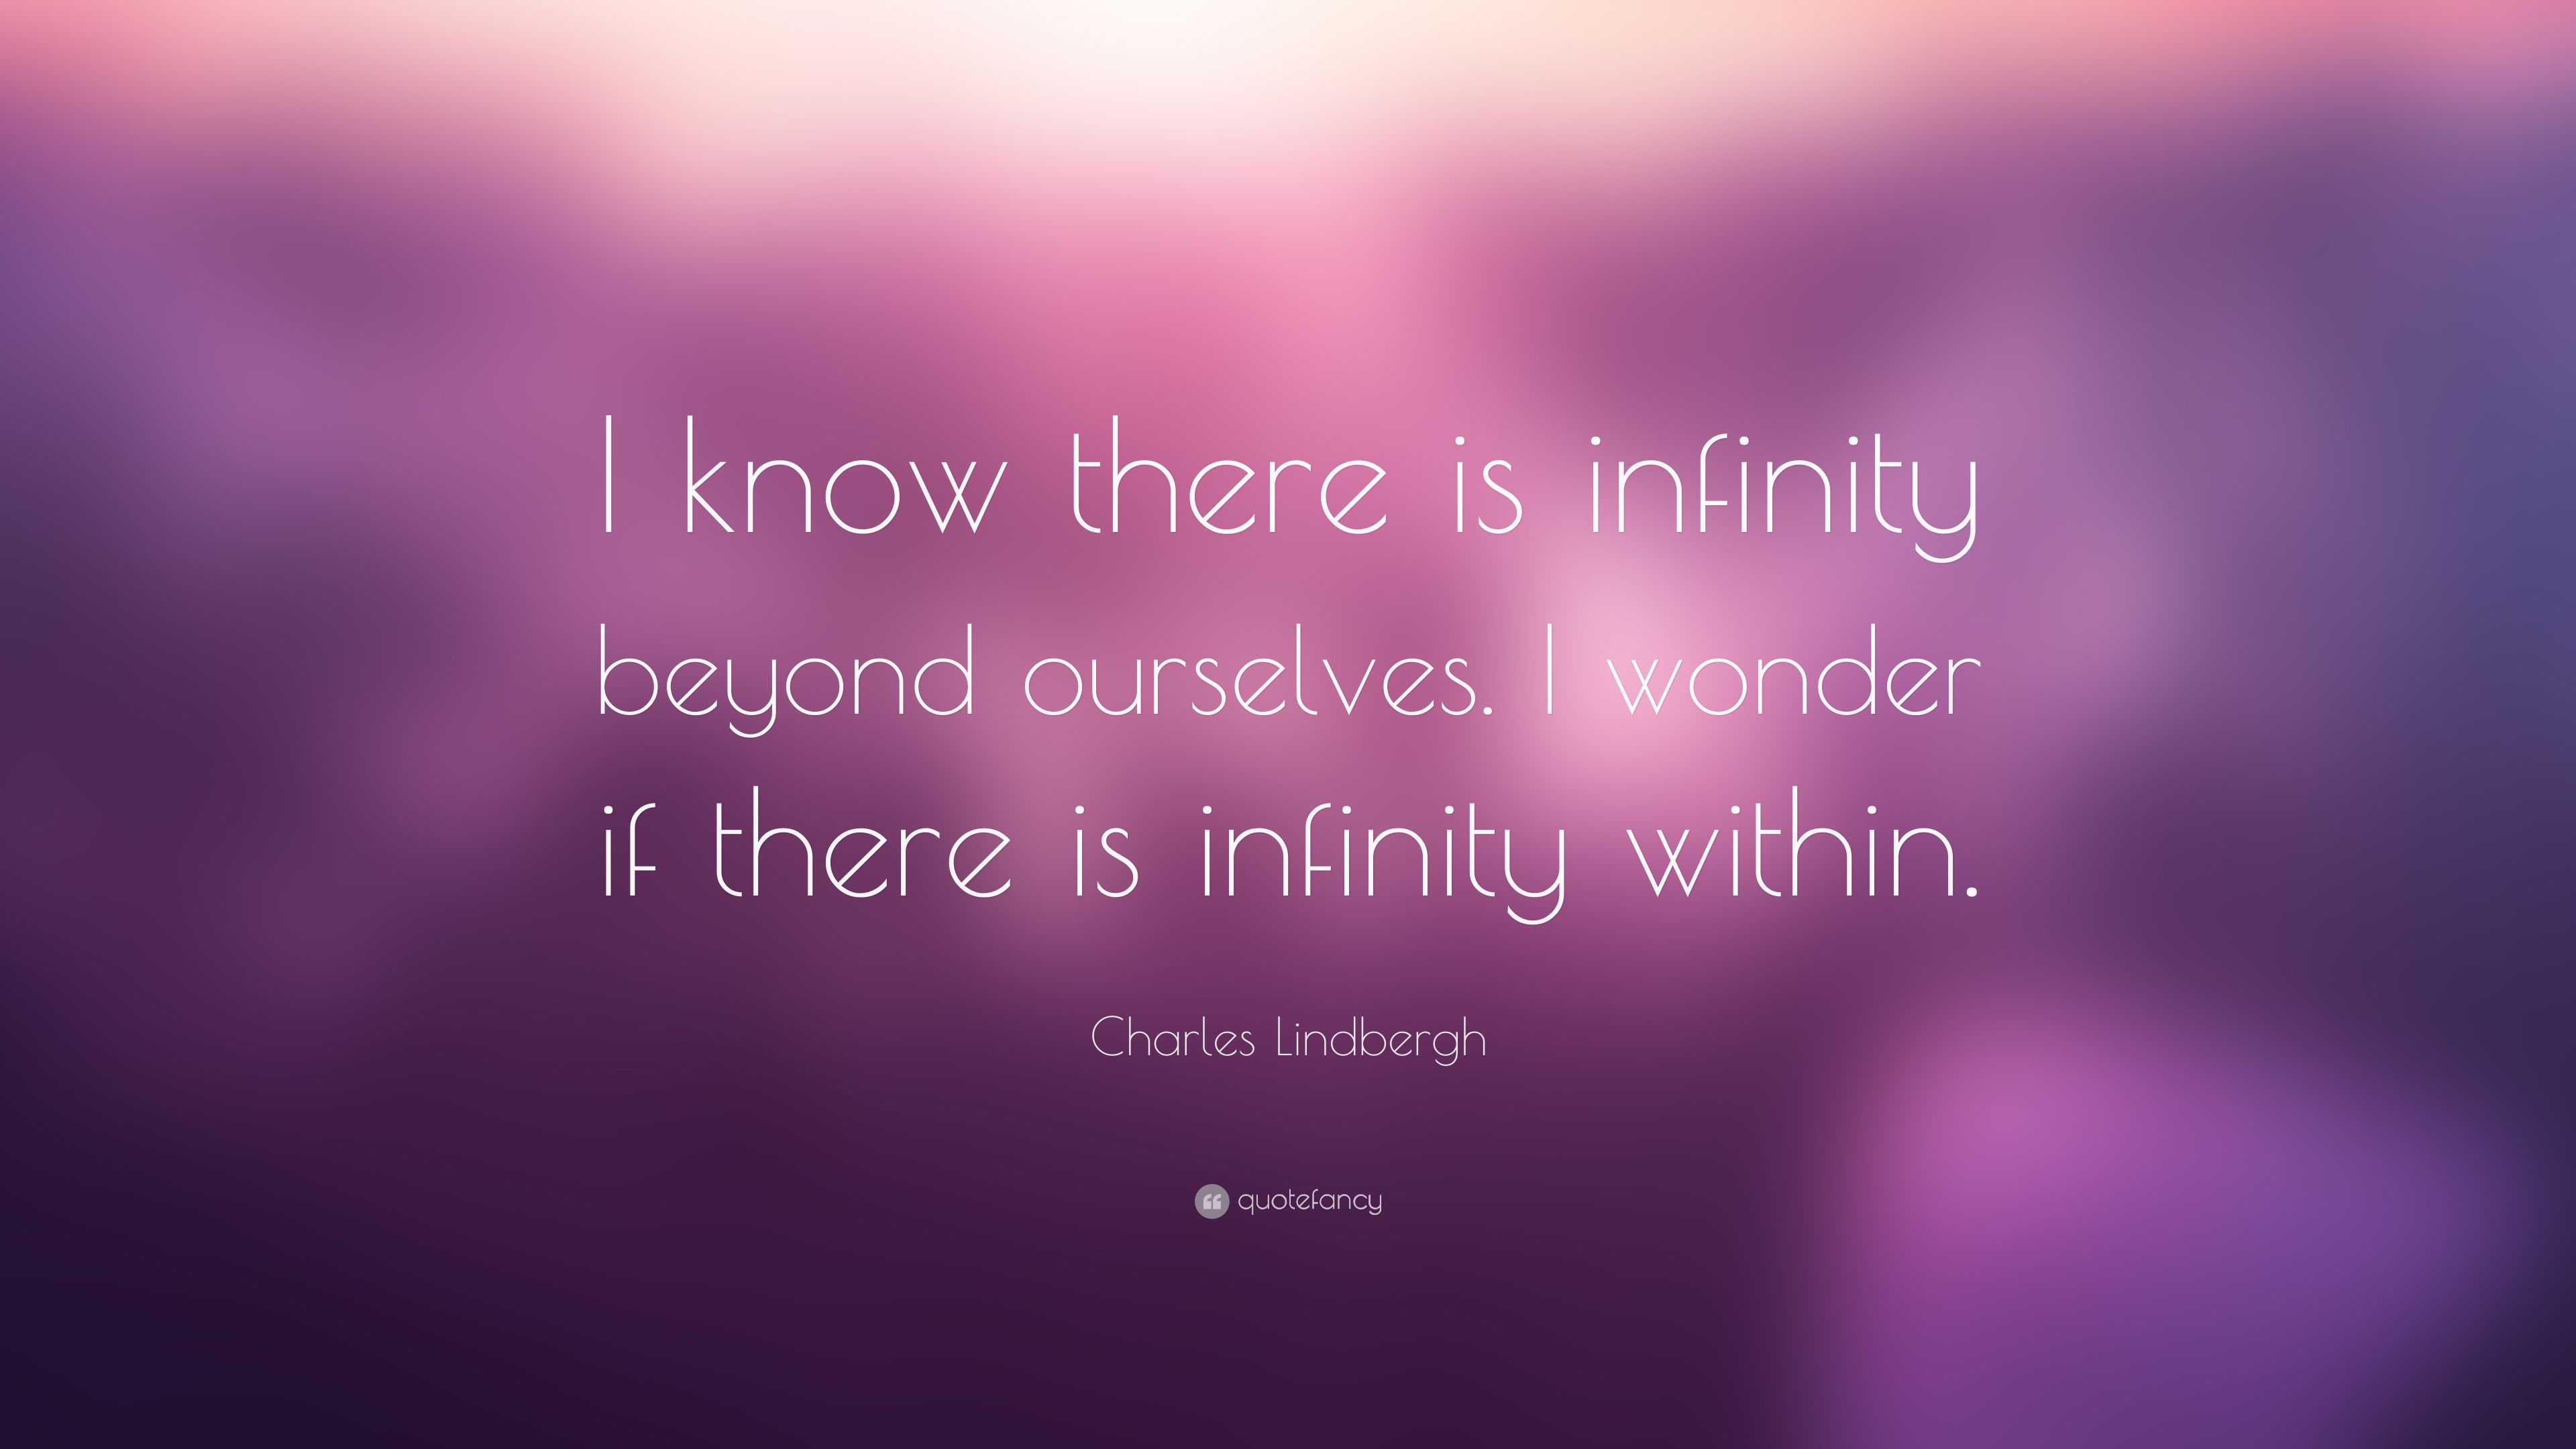 Charles Lindbergh Quote: “I know there is infinity beyond